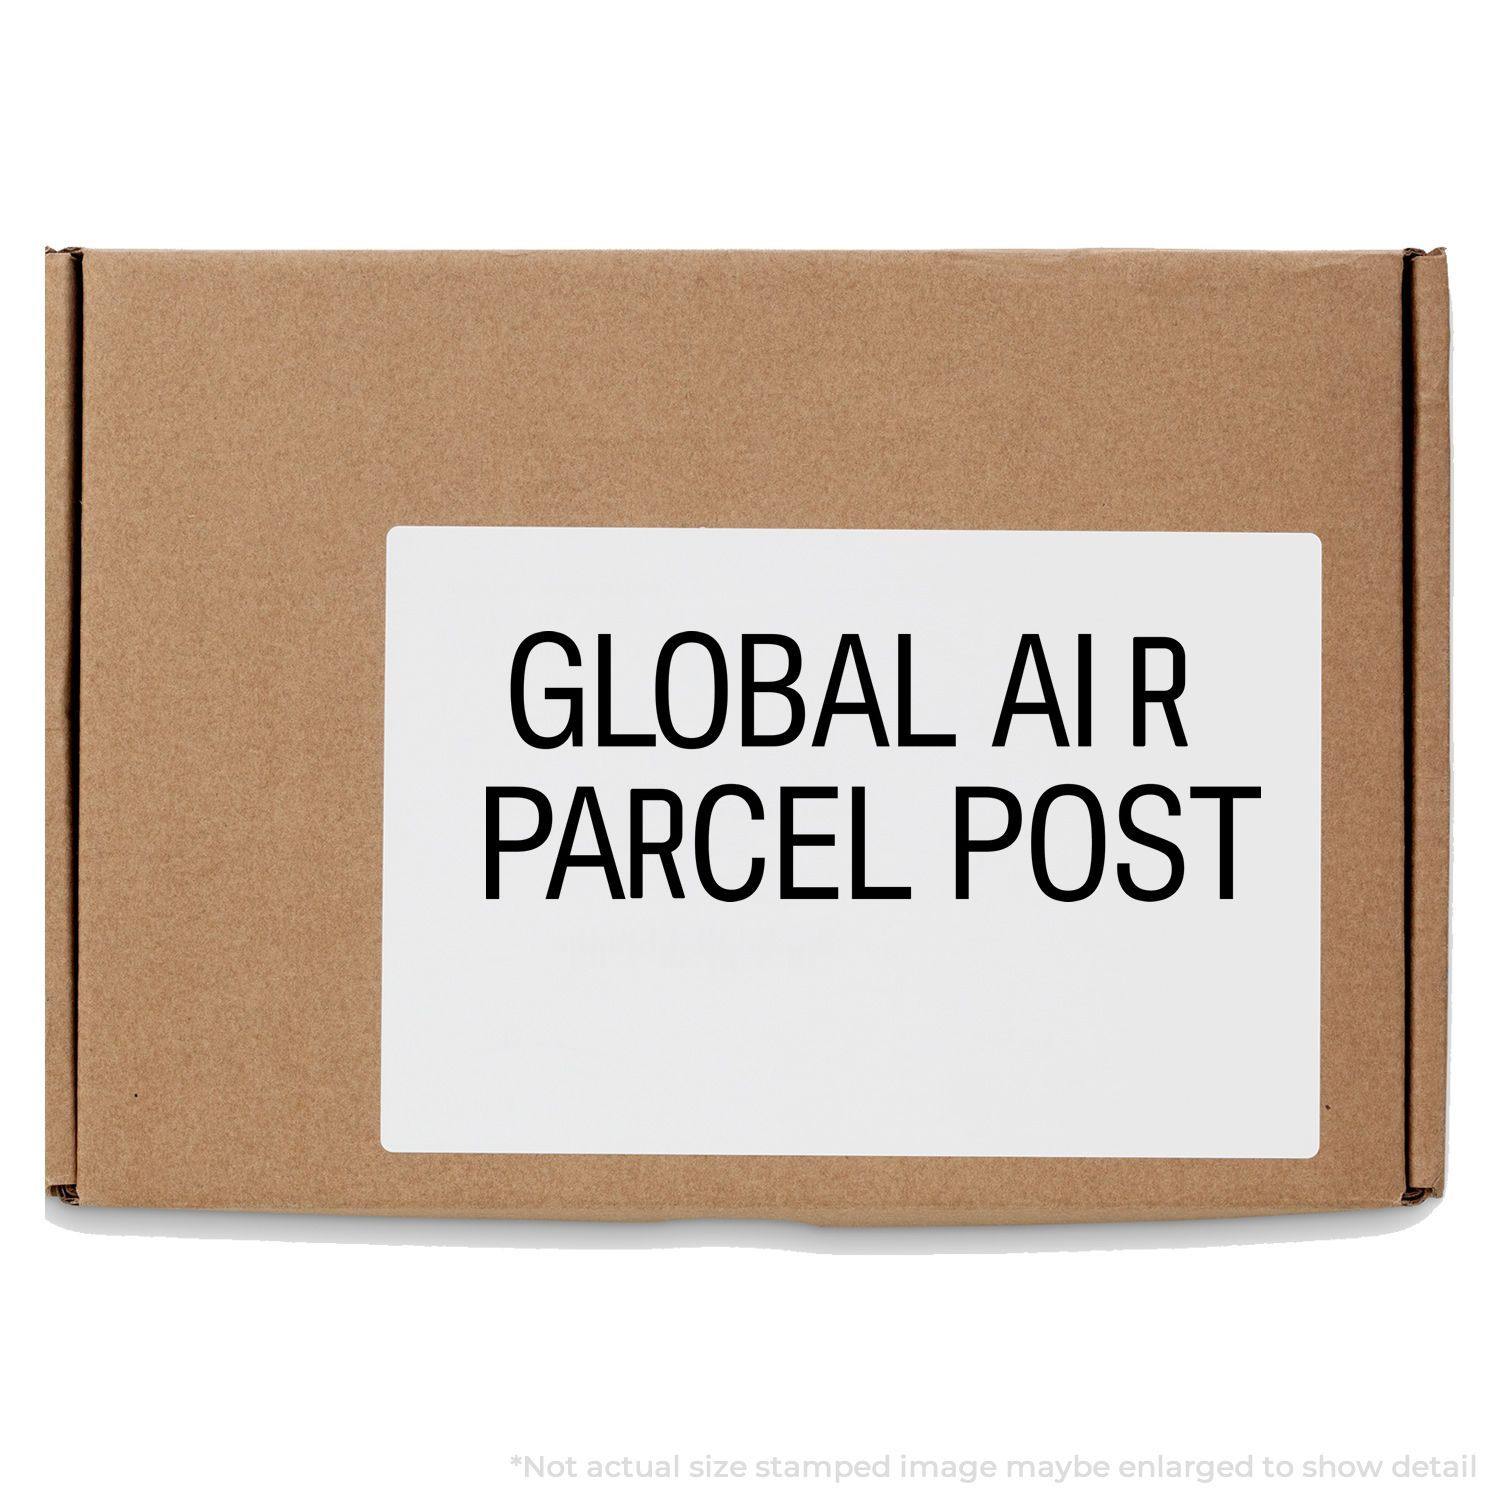 A stock office pre-inked stamp with a stamped image showing how the text "GLOBAL AIR PARCEL POST" is displayed after stamping.